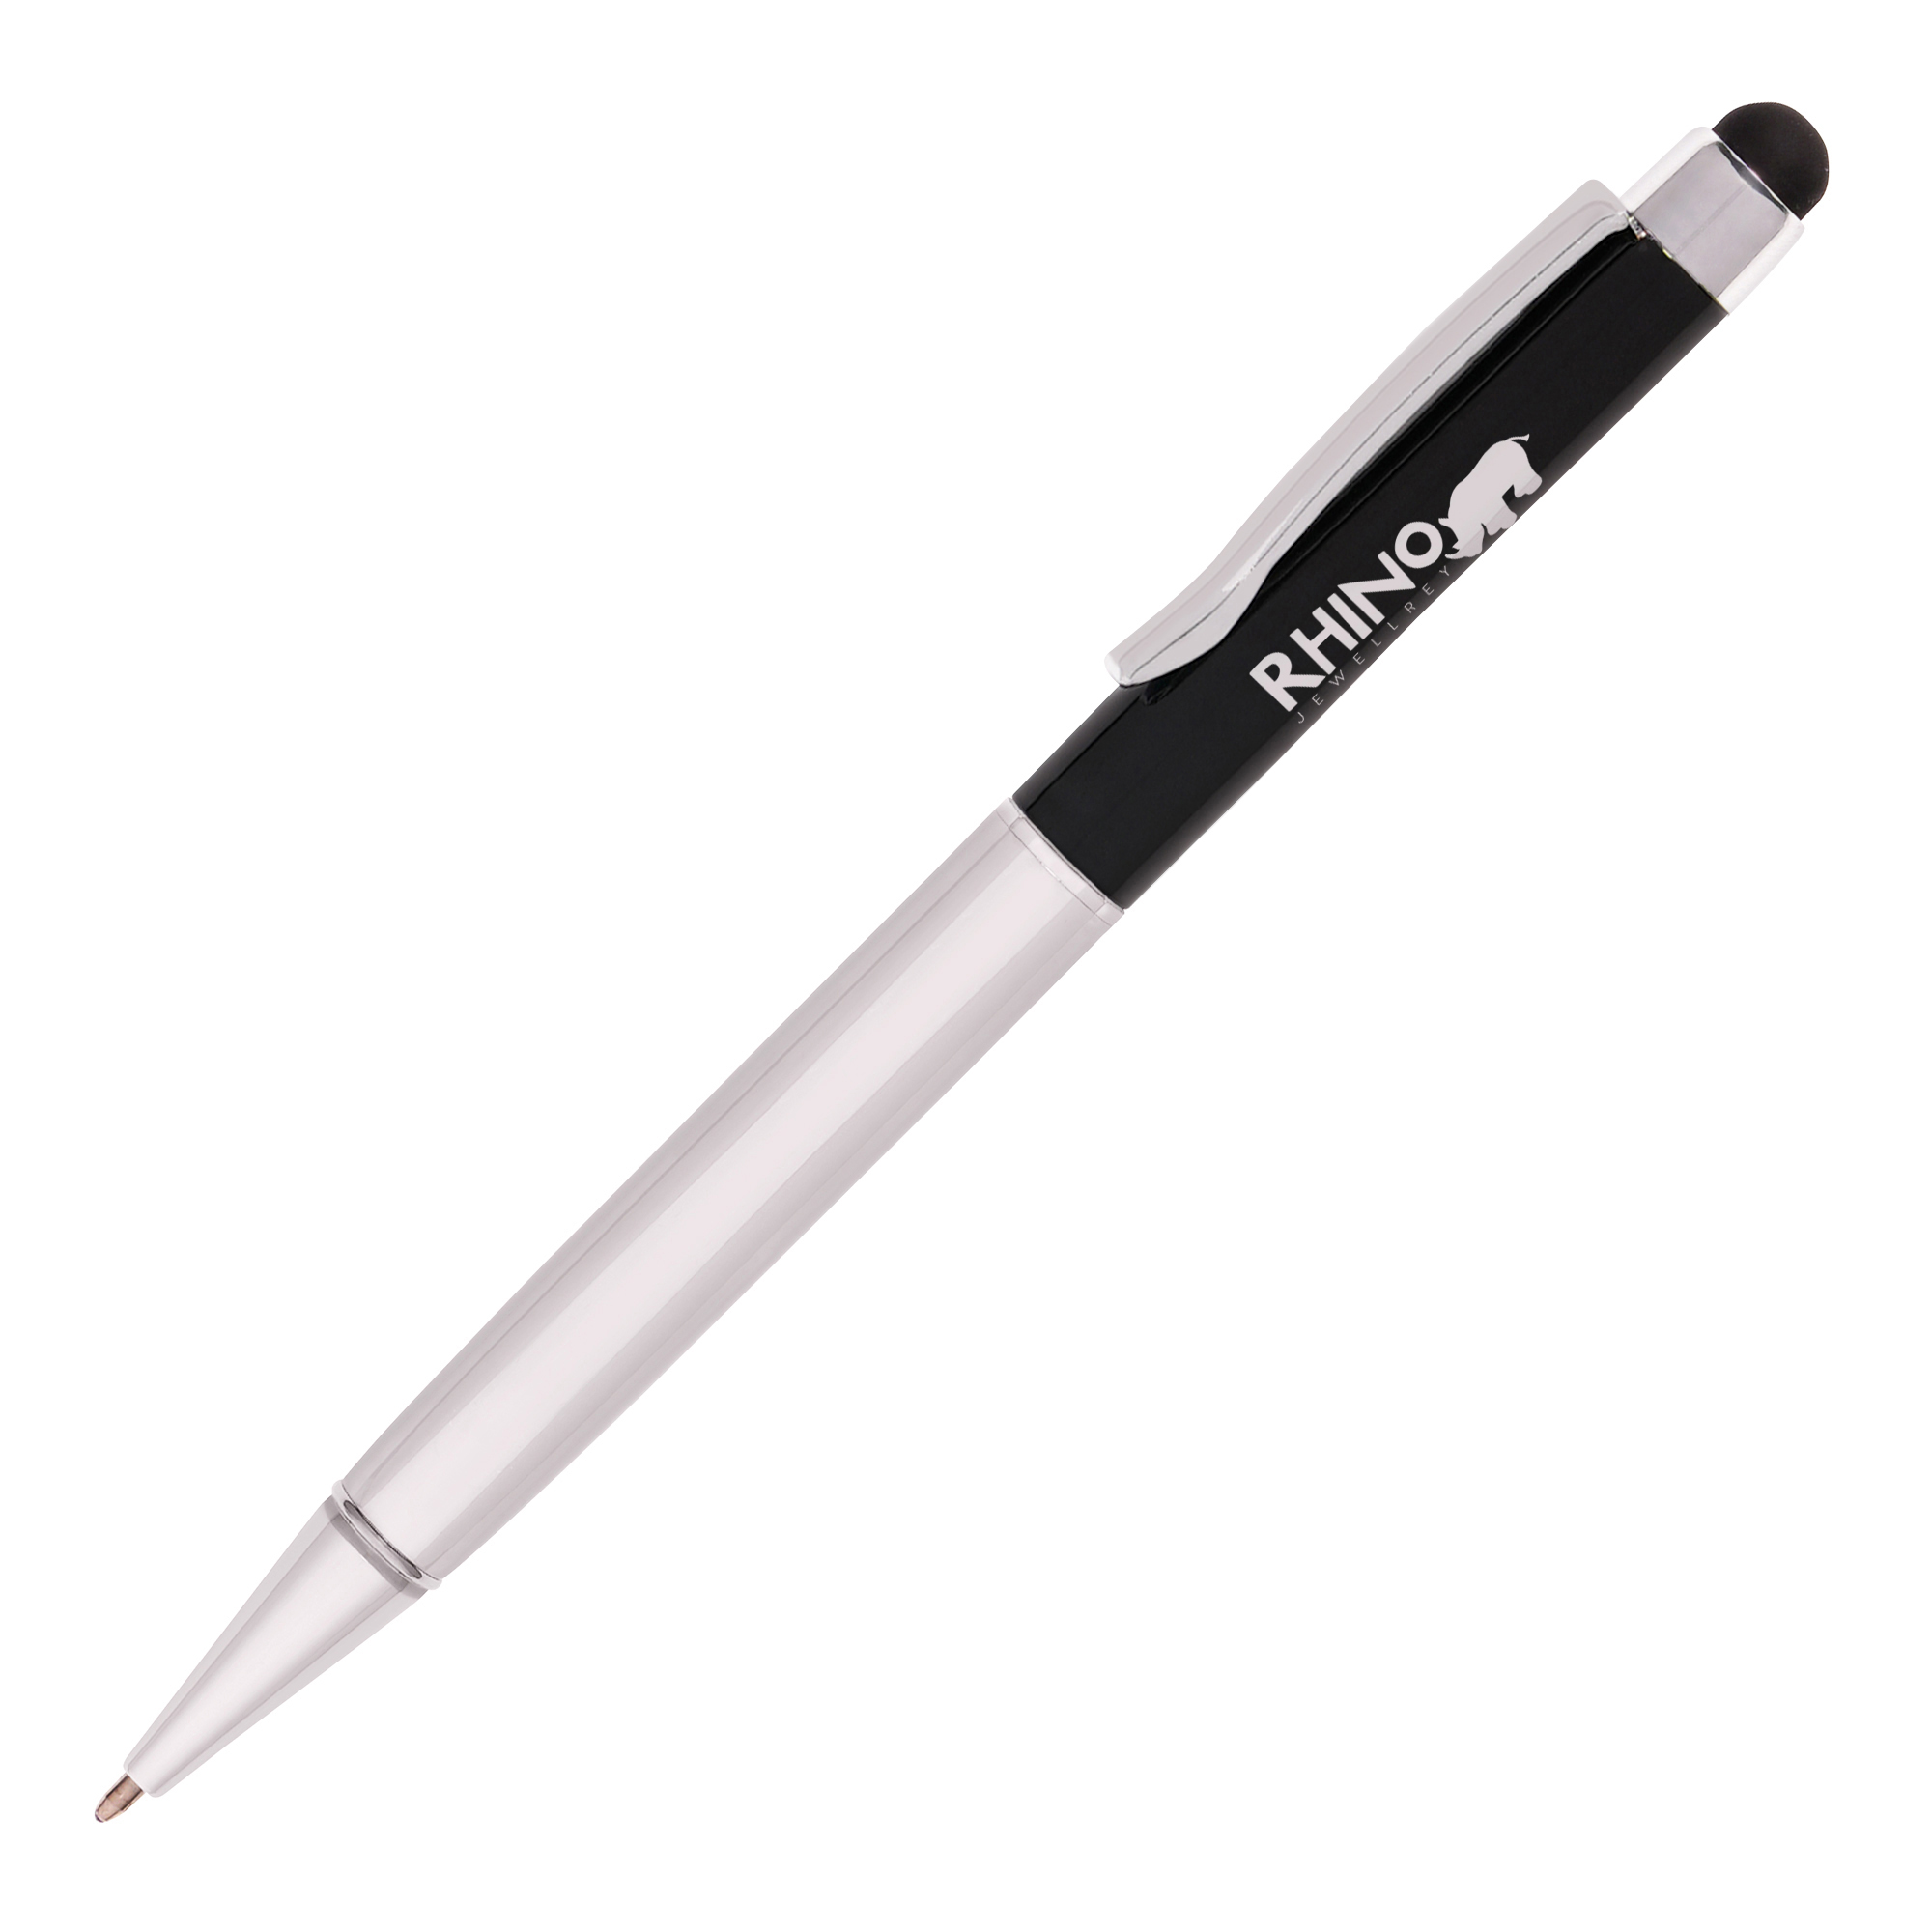 A metal twist action ball pen with soft touch stylus. The high shine metal trims add the finishing touches to this useful, dual purpose pen.